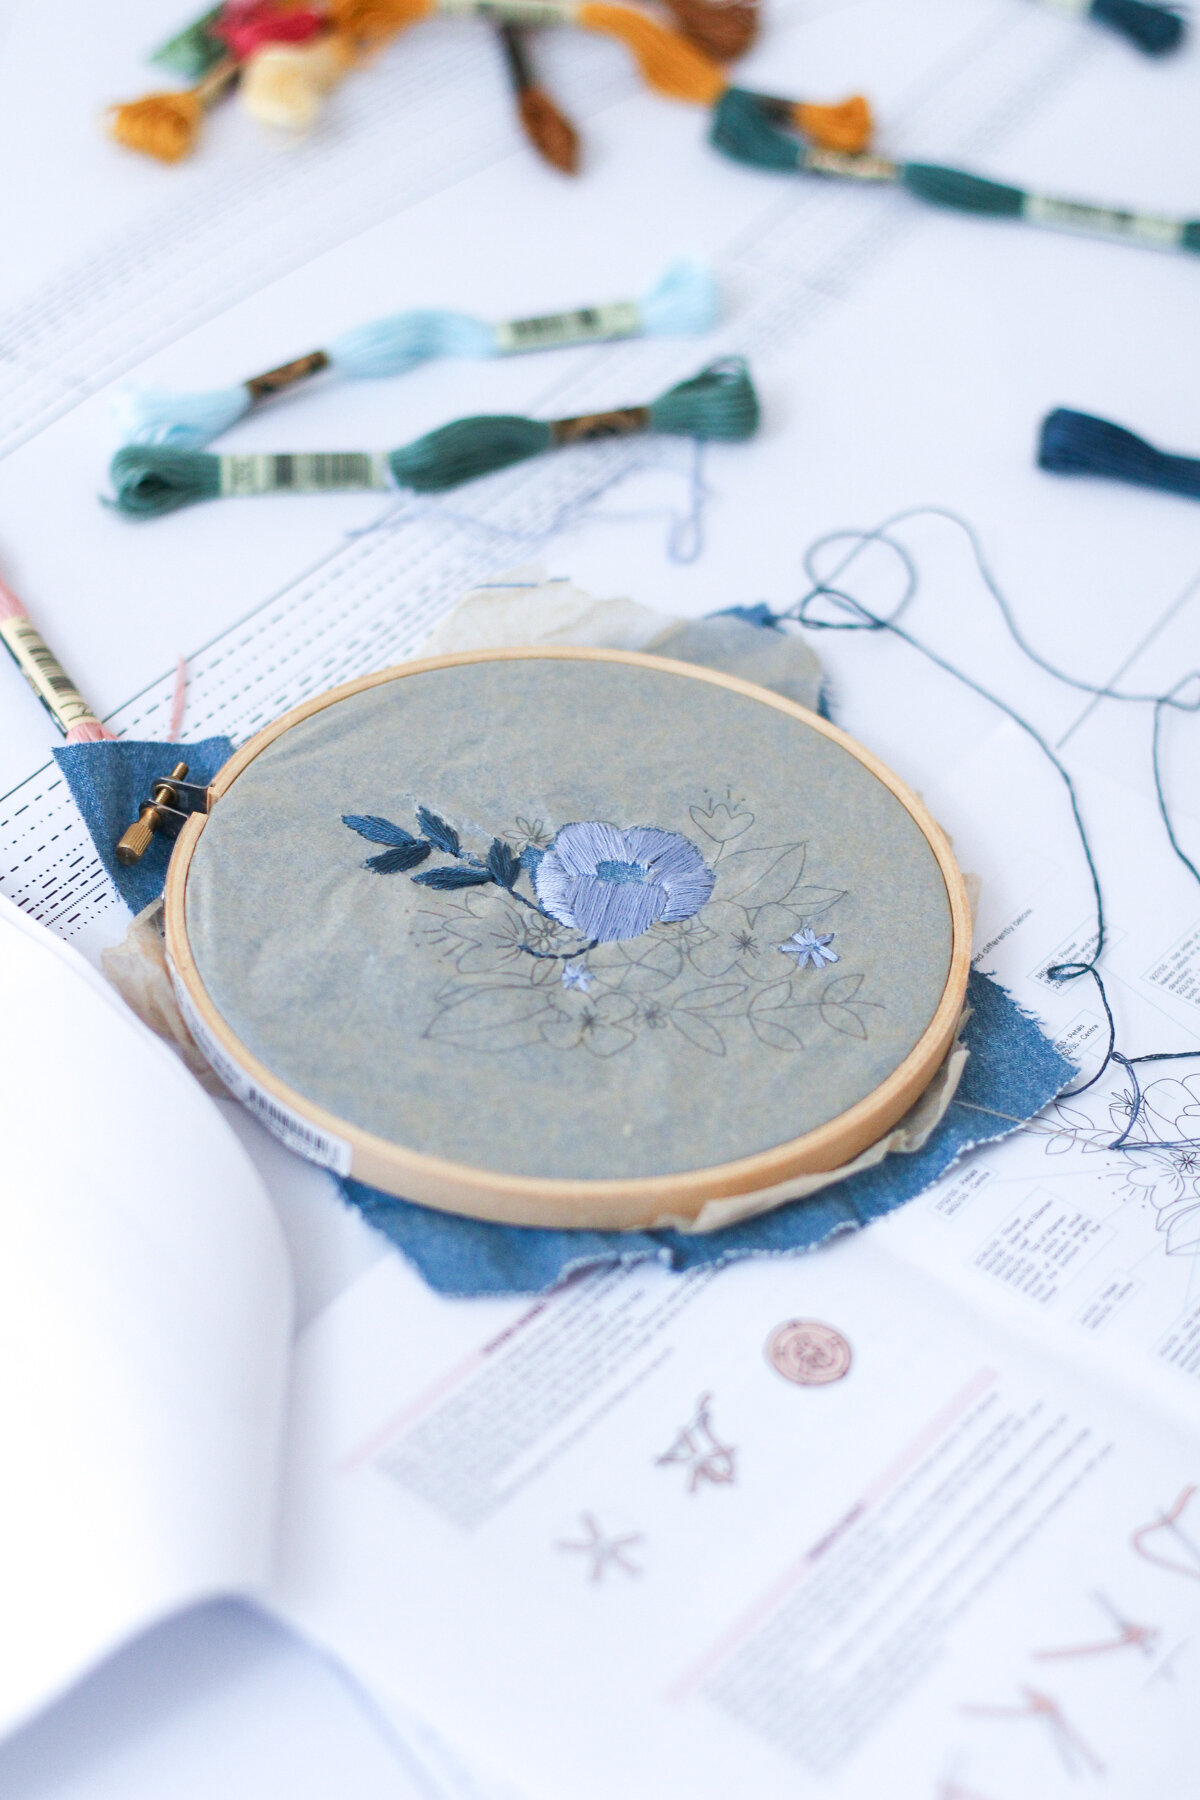 A Stitch in Time - 2020 Embroidery Journal Deepdive